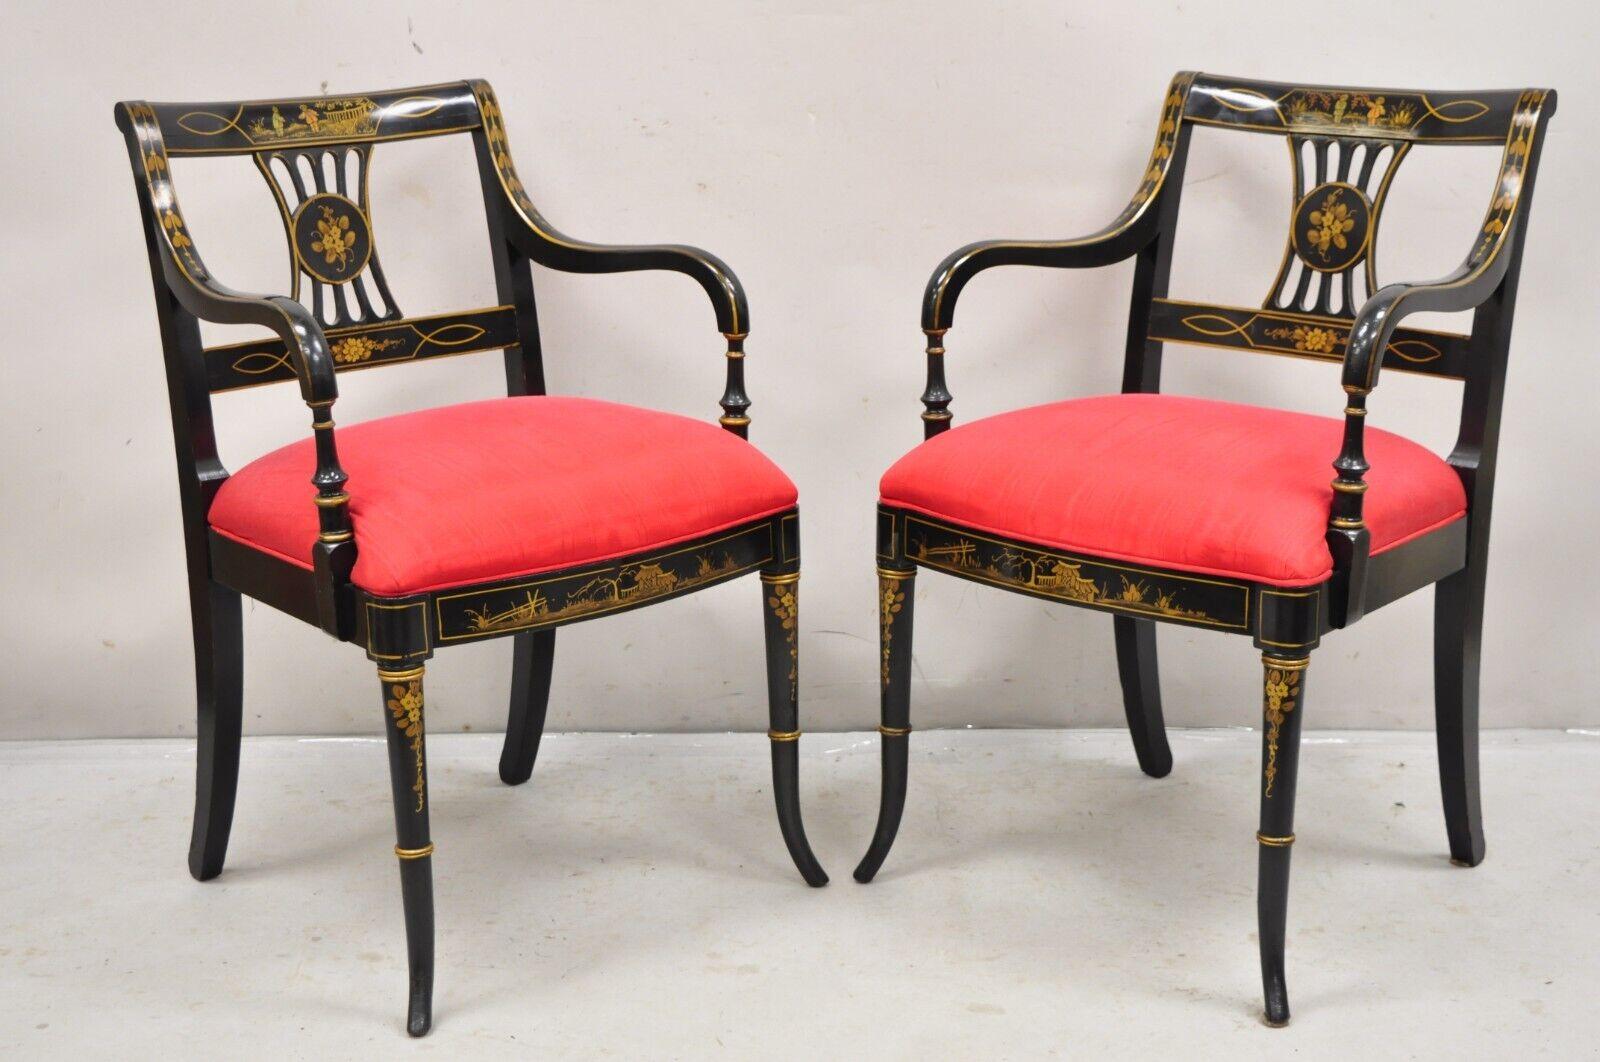 Union National Chinoiserie English Regency Black Painted Dining Chair - Set of 6 In Good Condition For Sale In Philadelphia, PA